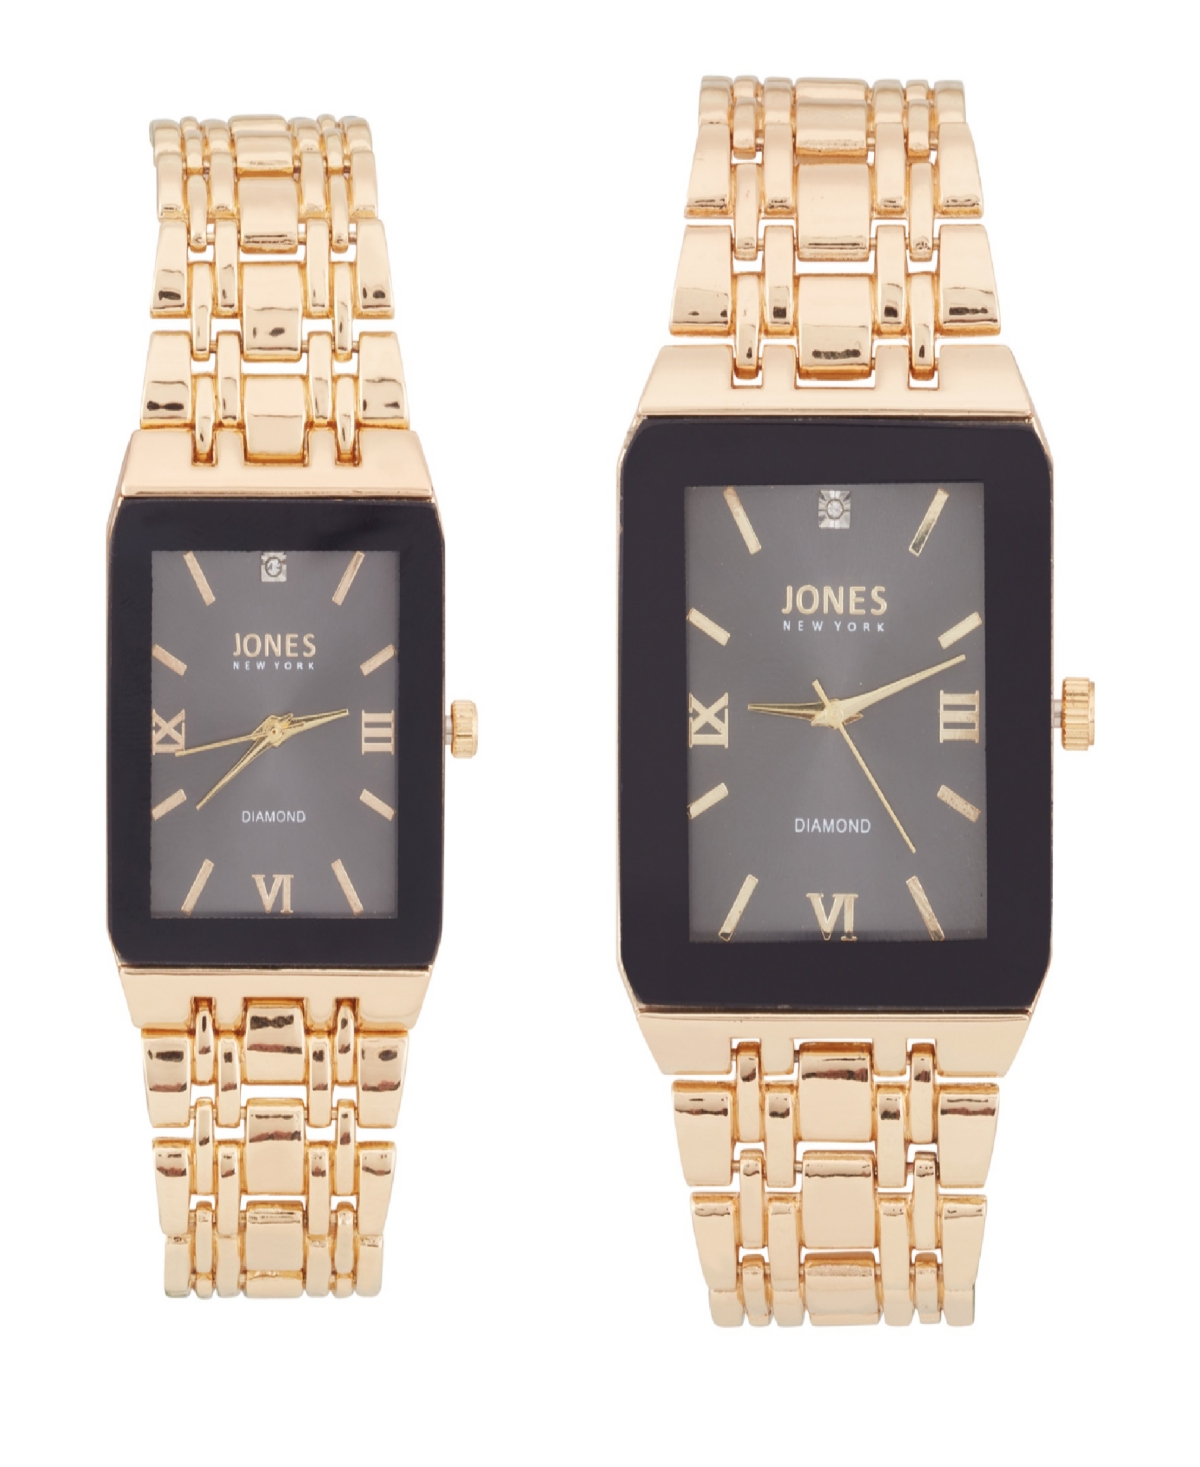 Men and Women's Analog Shiny Gold-Tone Metal Bracelet His Hers Watch 40mm, 32mm Gift Set - Black, Gold